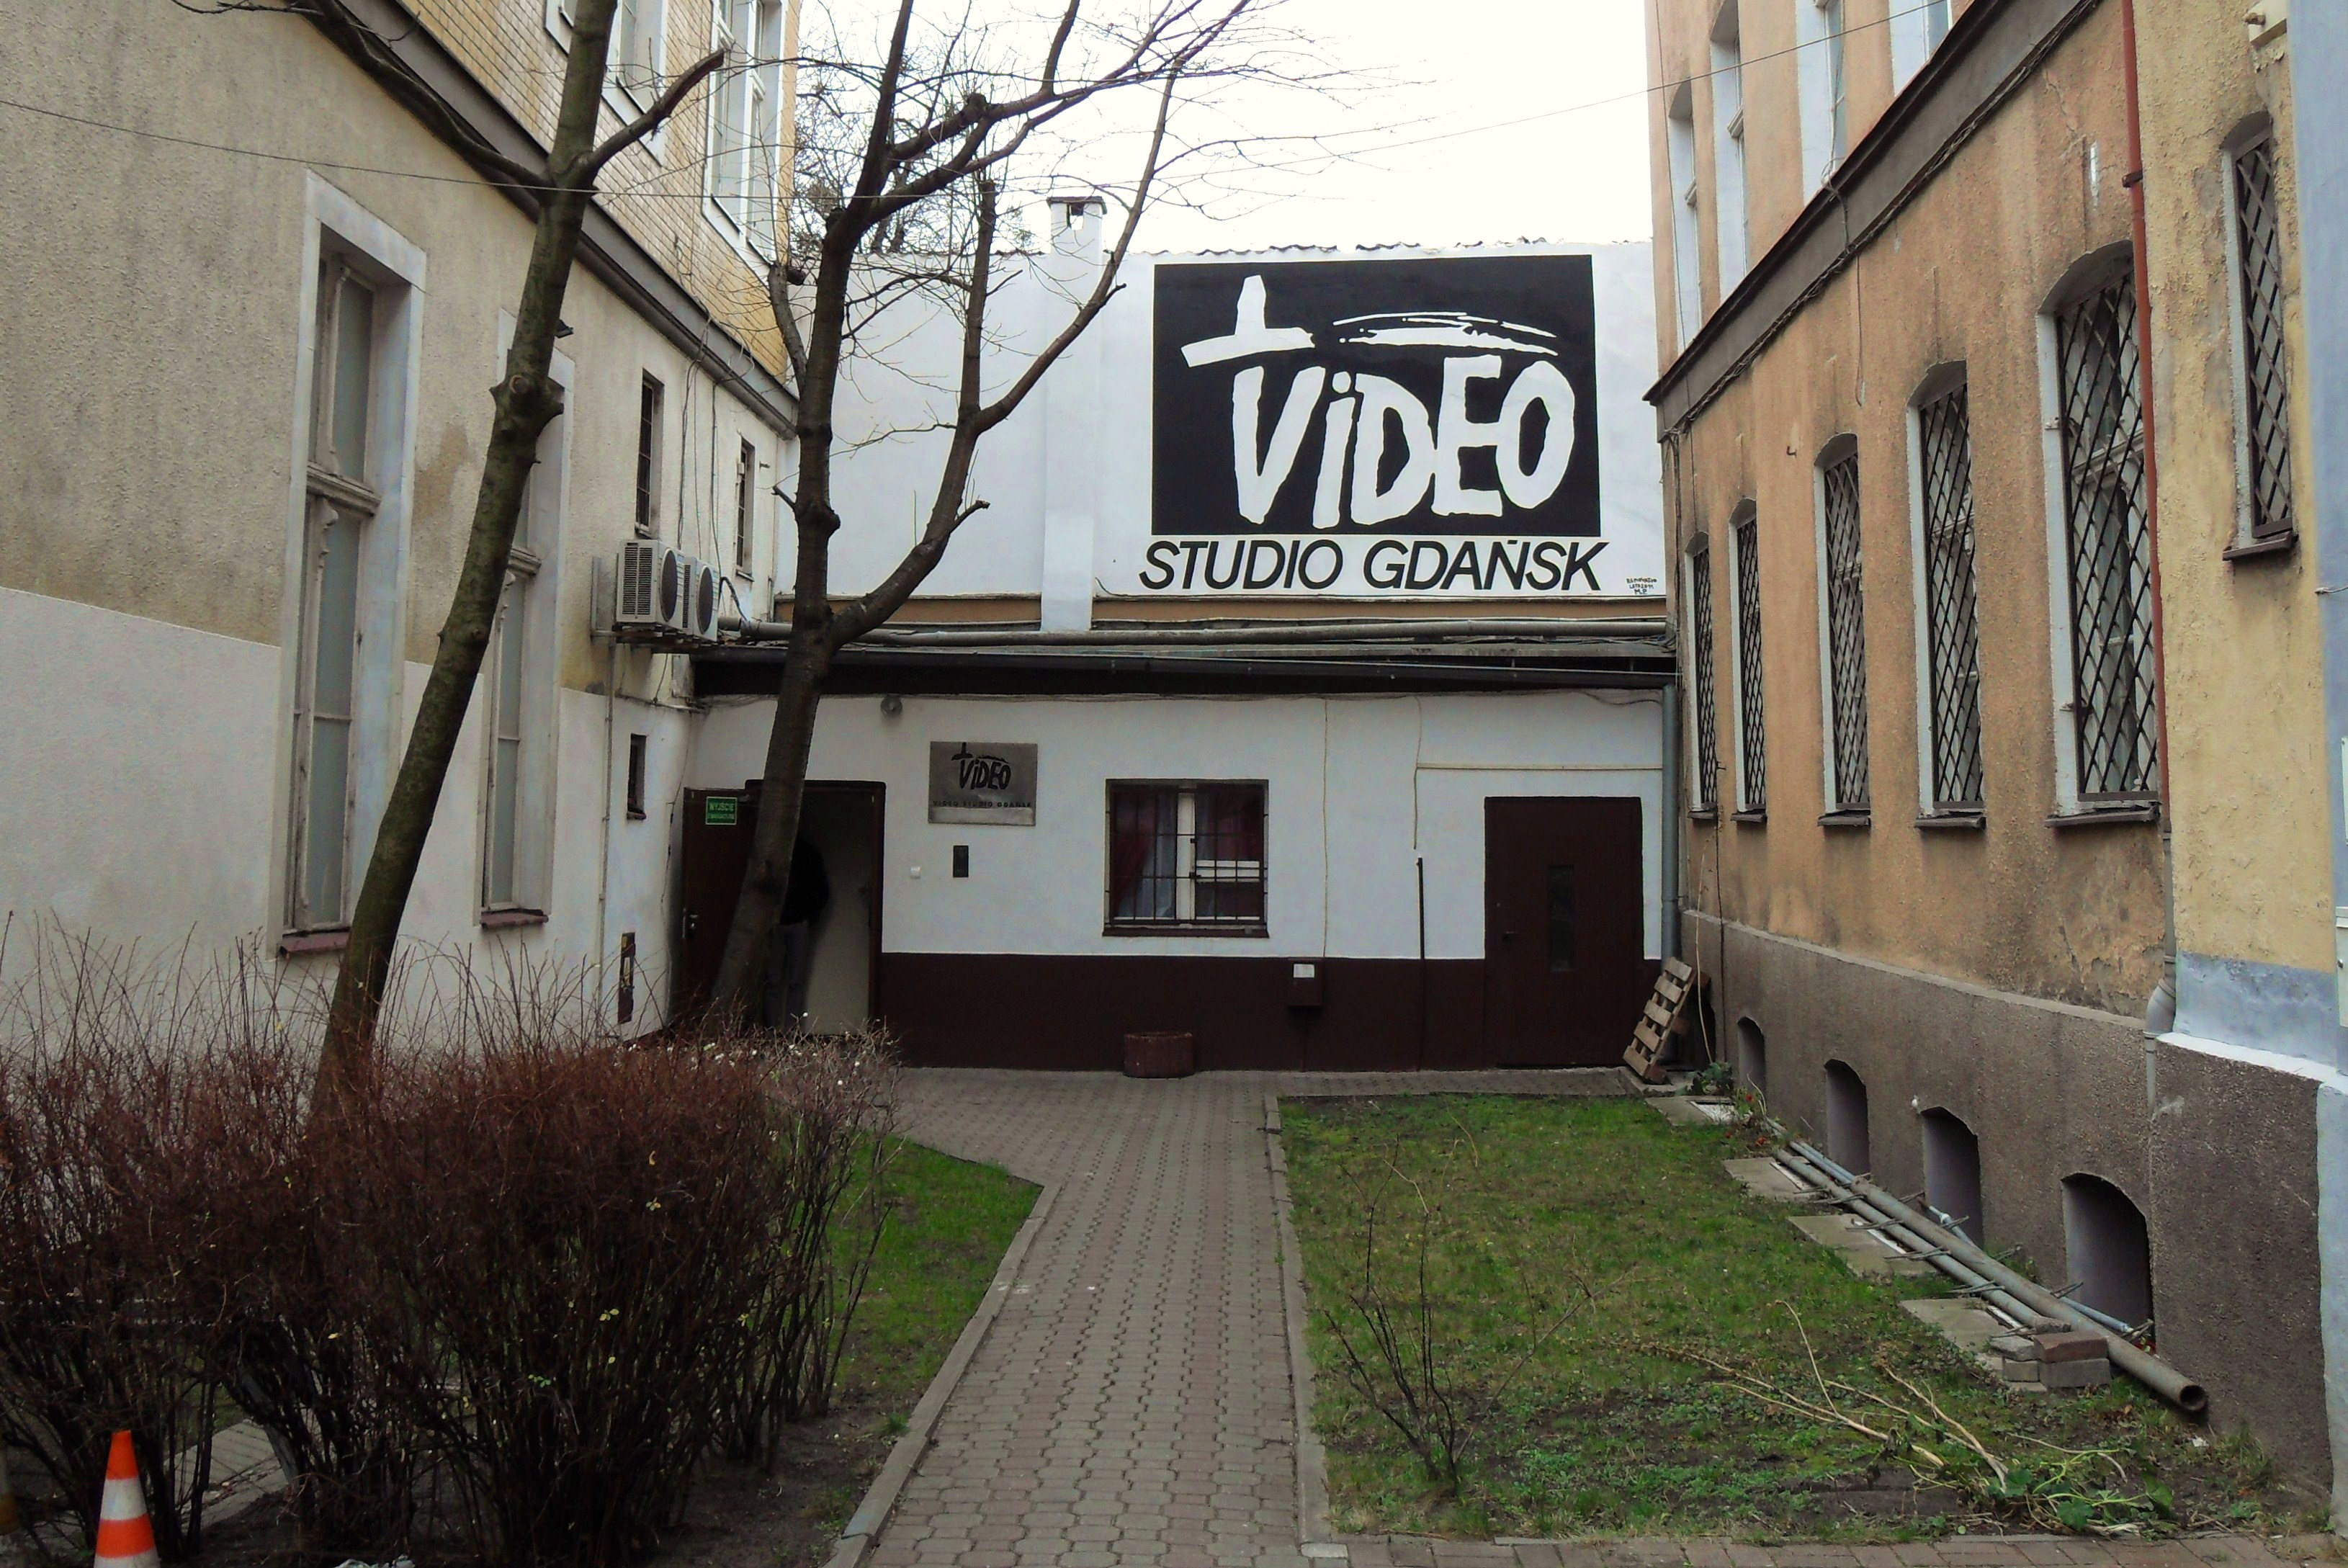 The headquarters of Video Studio Gdańsk.